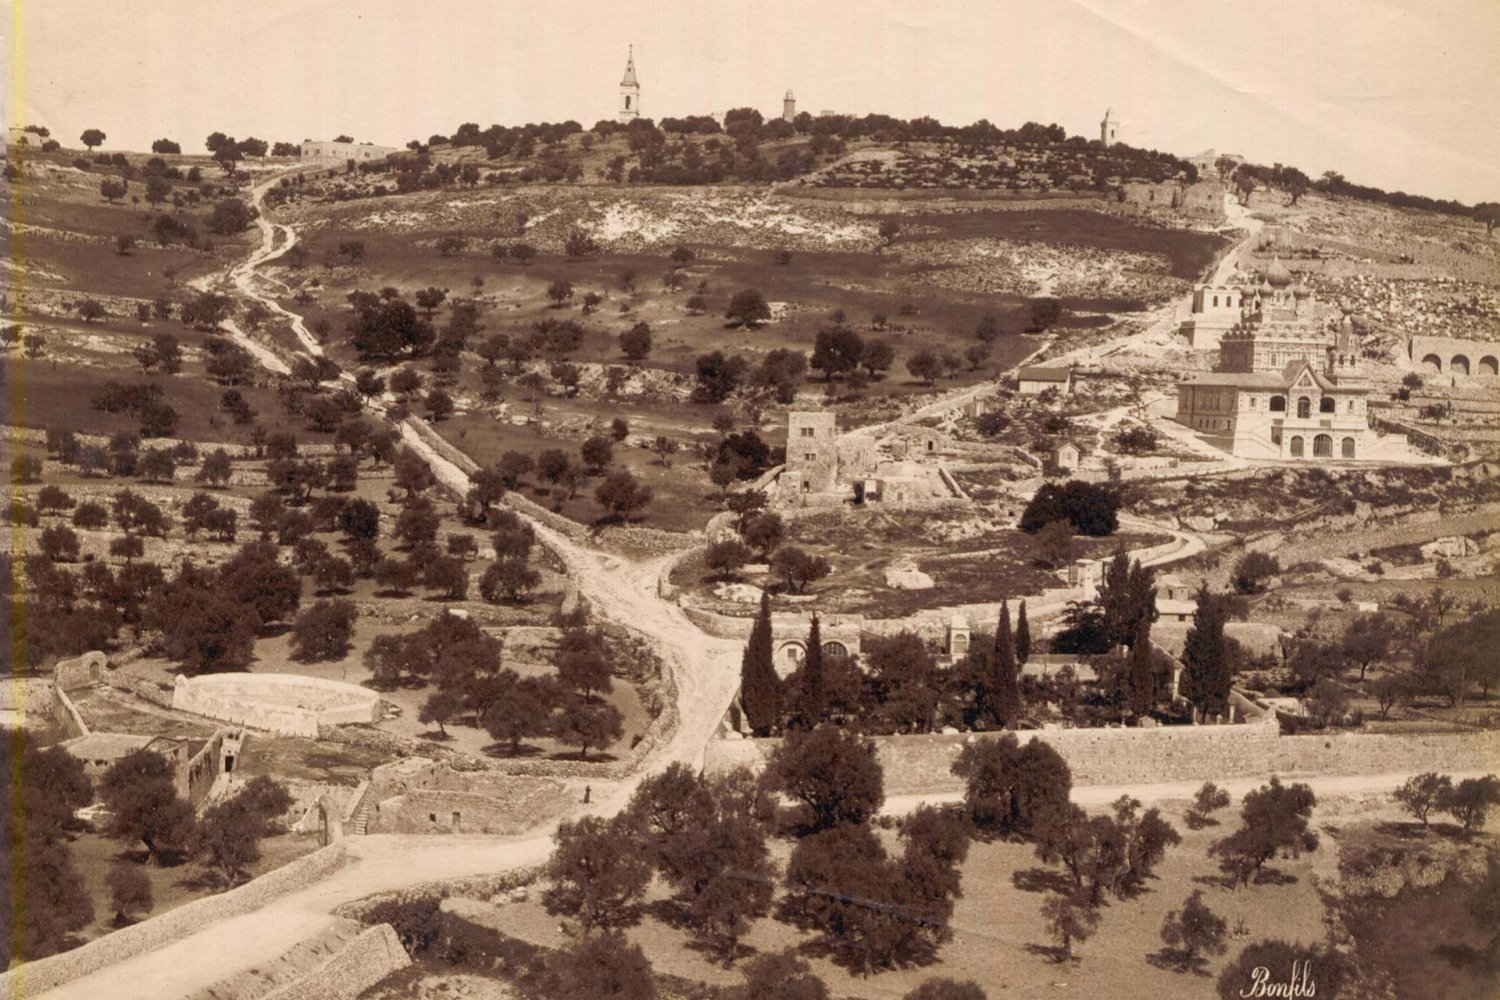 Black-and-white photo of the Mount of Olives in Jerusalem in 1870